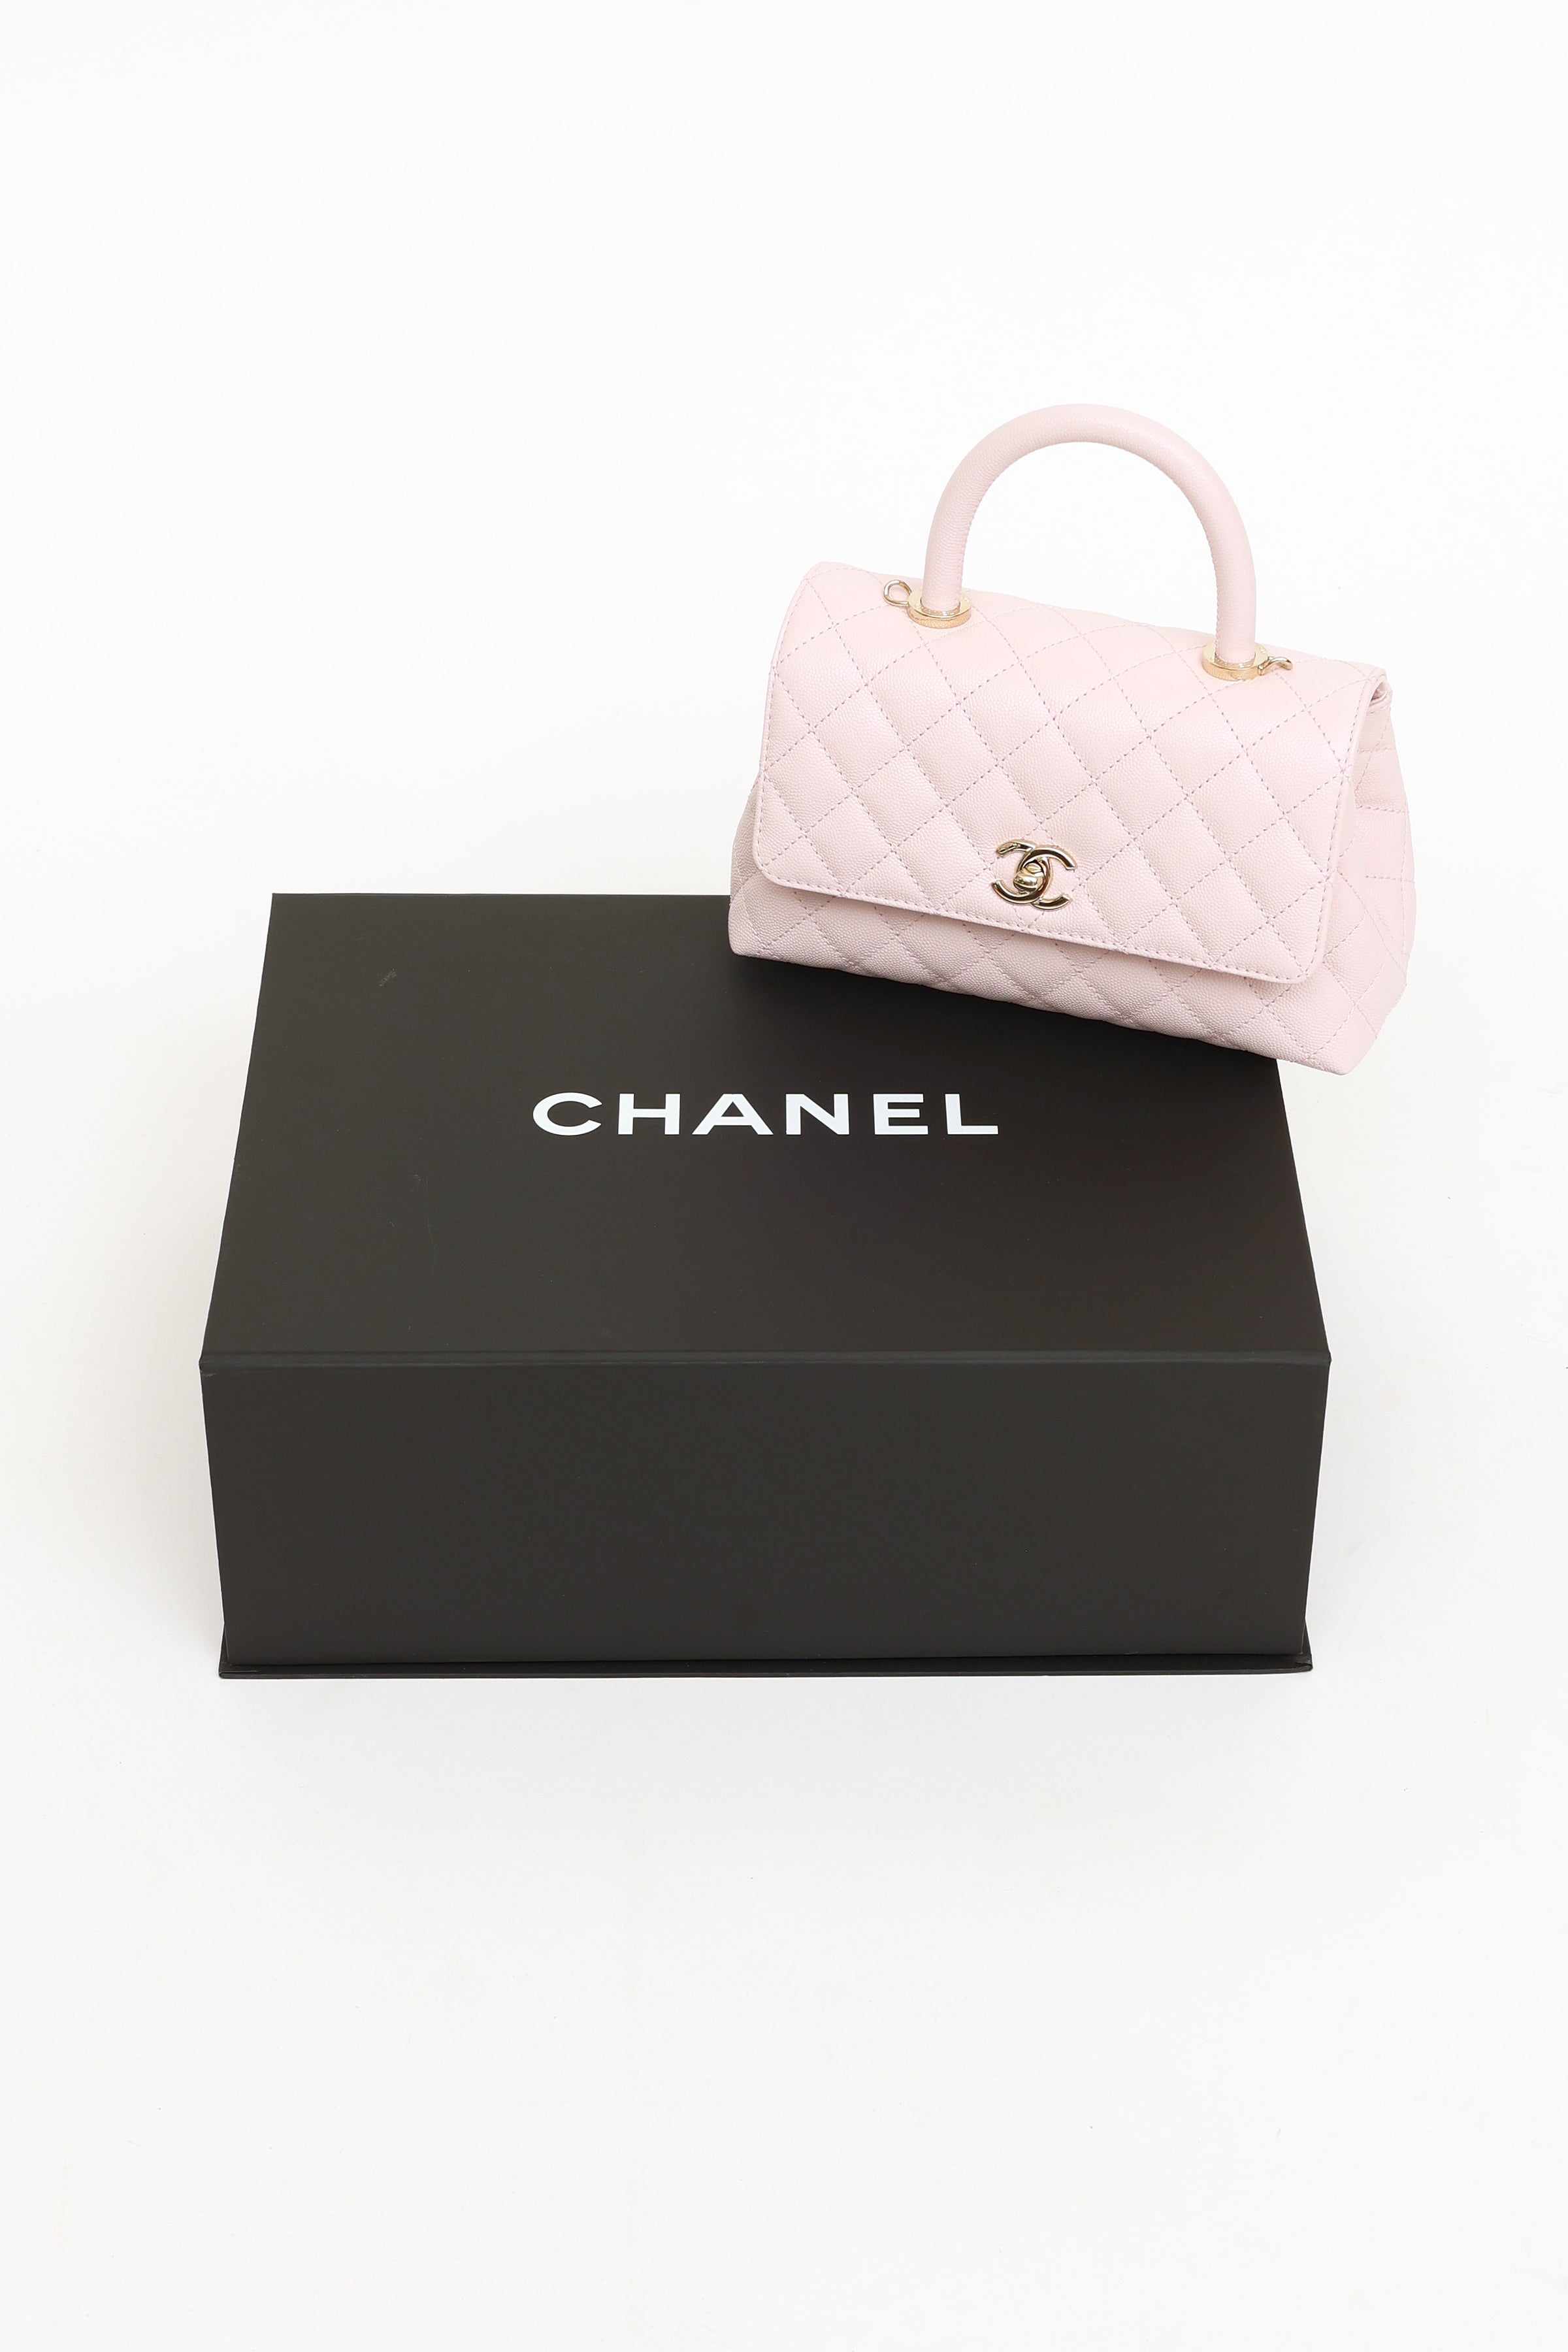 NEW PRETTY!💗22P Chanel Small Business Affinity Rose Clair Pink💗 Caviar  GHW Bag